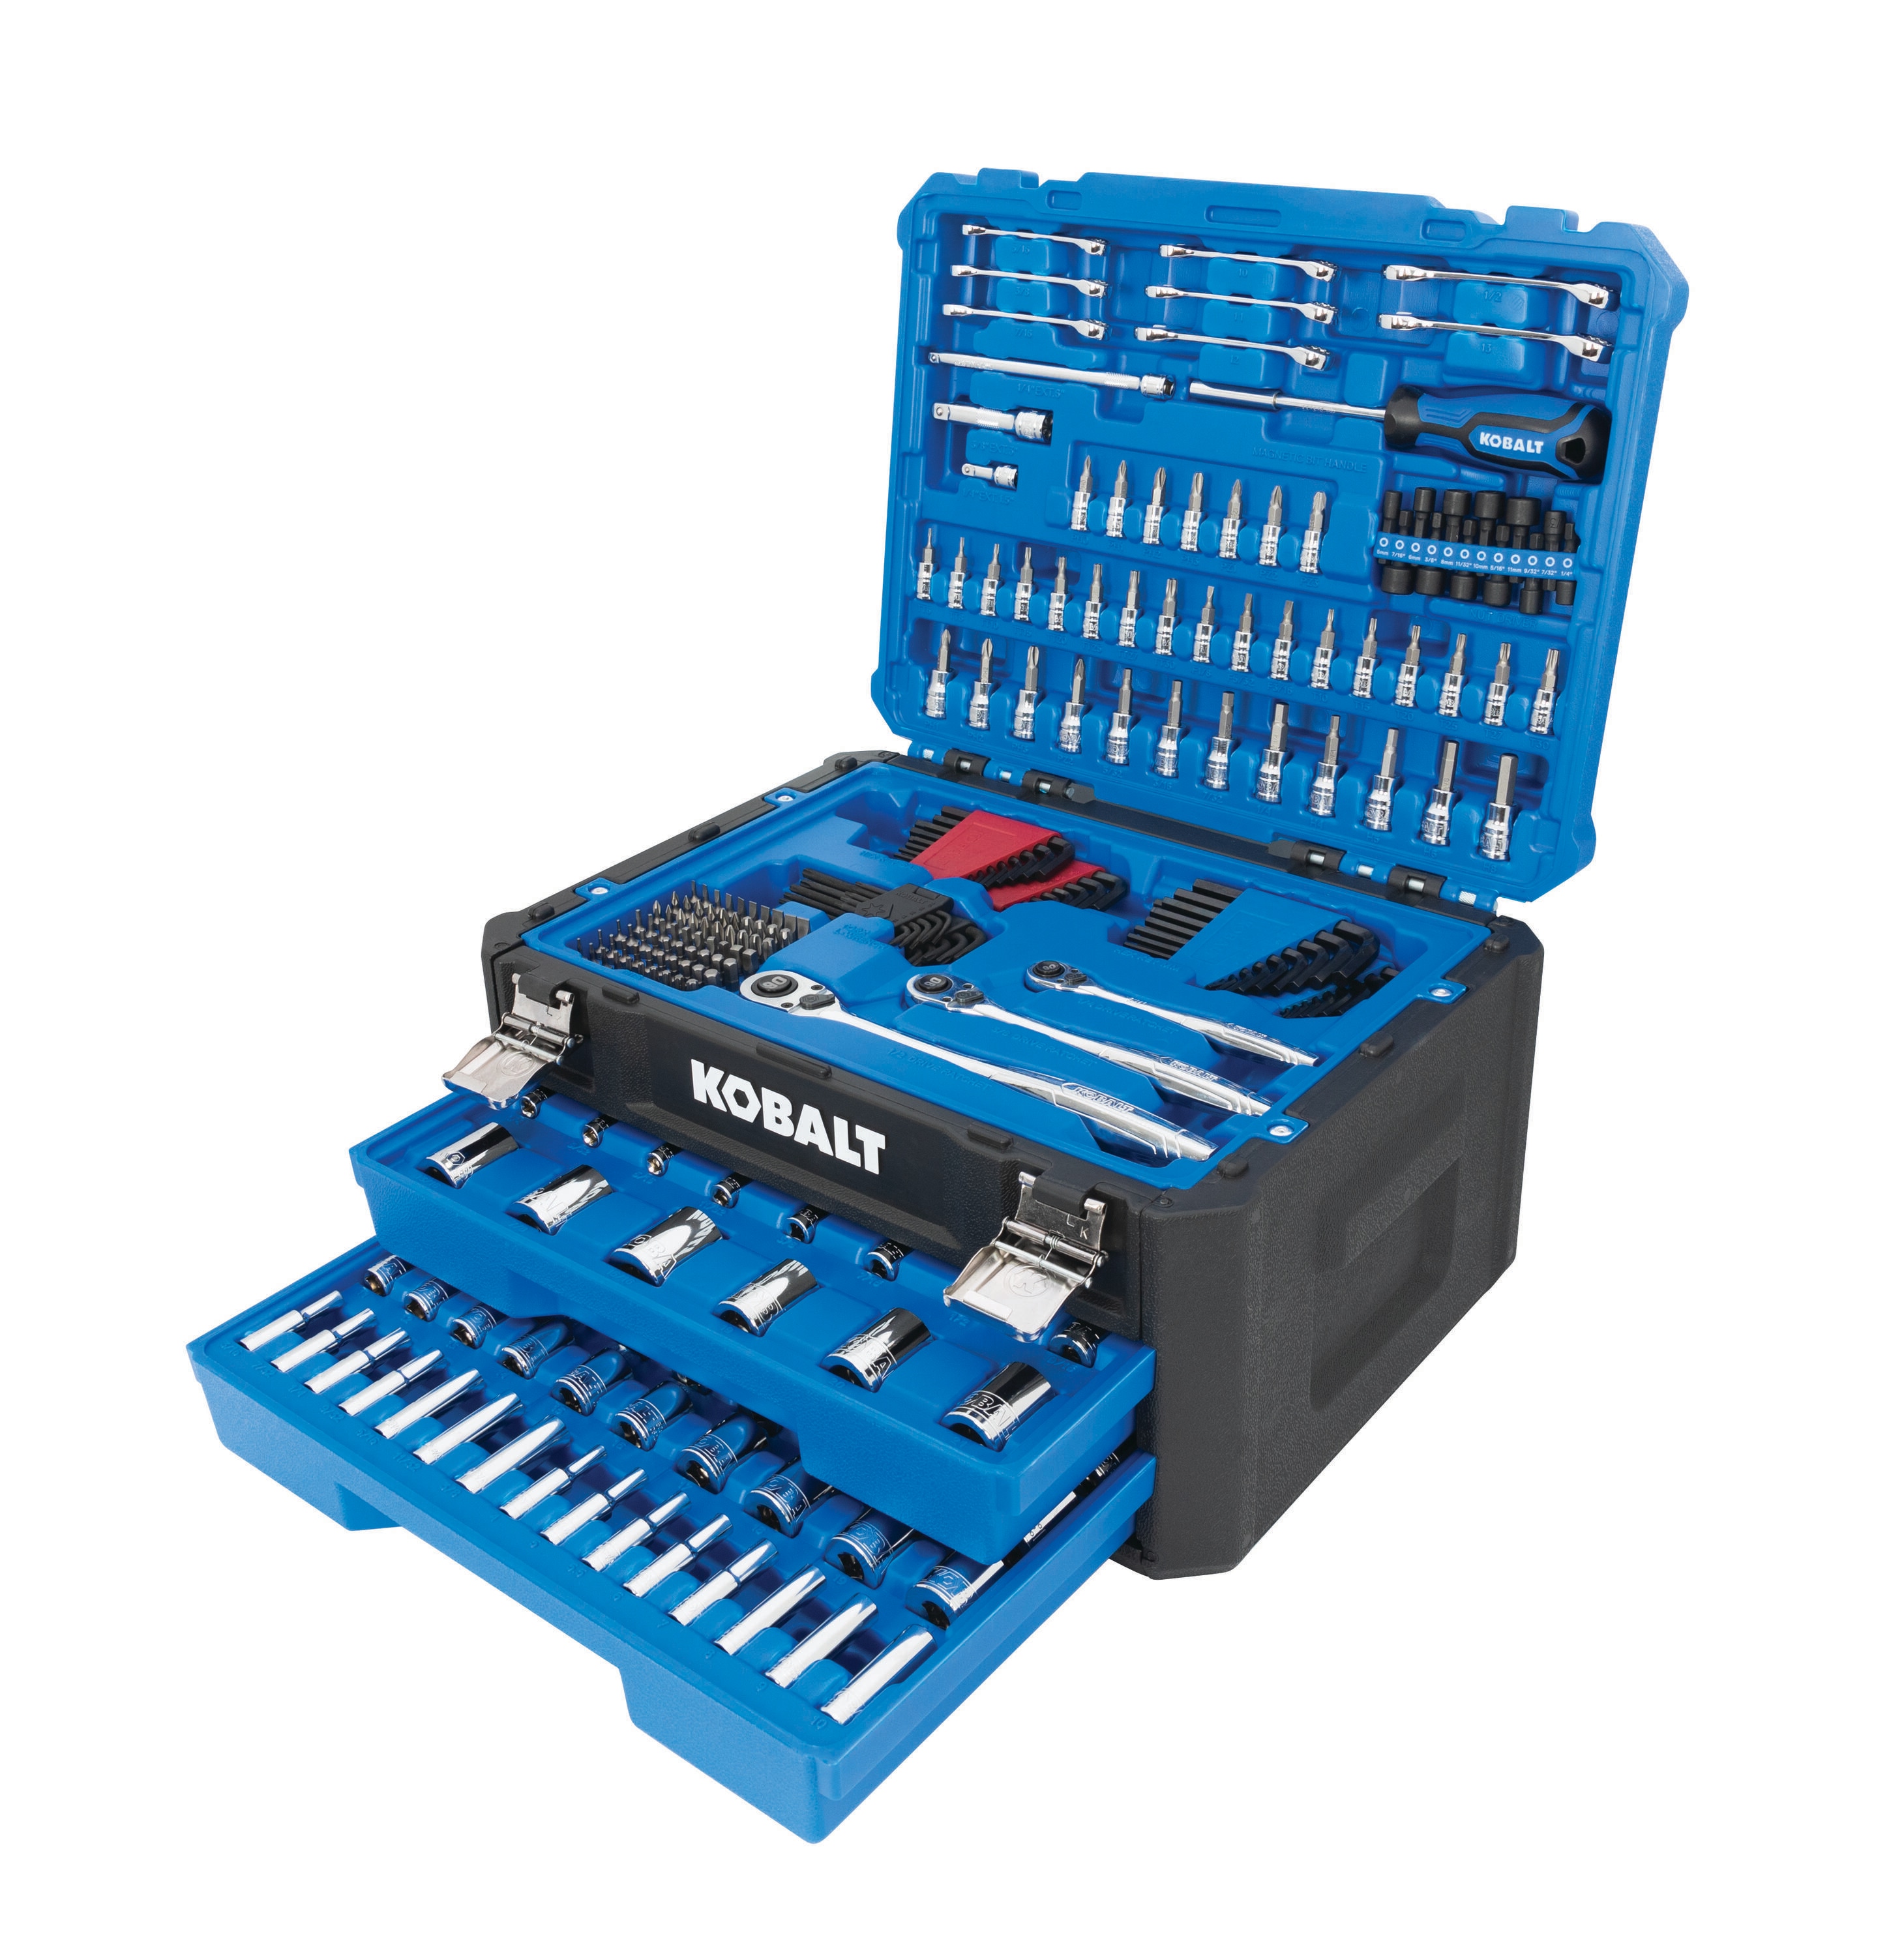 10 Best Basic Tool Sets for DIY Jobs Around the House